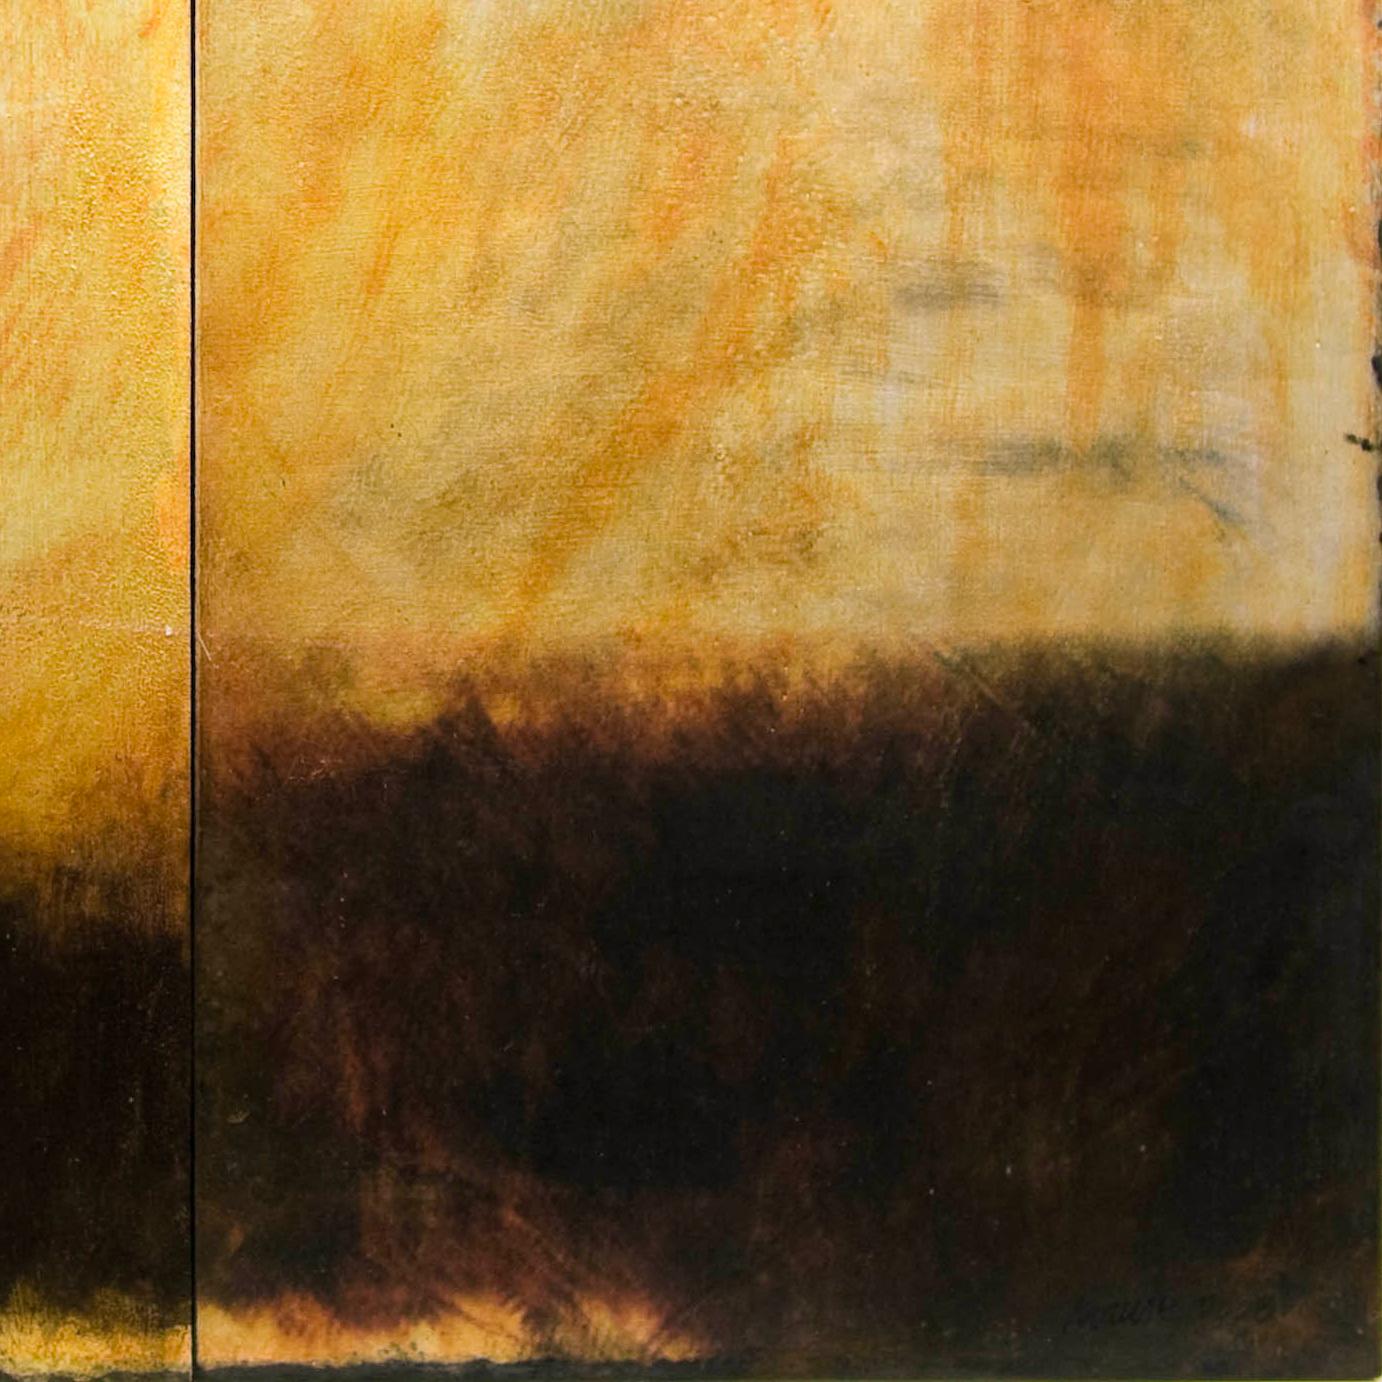 “Silver Rain” is a 24 x 32 inch diptych, an abstract landscape of a brushy, dark mass which gives way to a loose, painterly sky layered with cadmium red orange rainstorm of brush strokes which seem to float on the silver ground.  Krause’ origins as